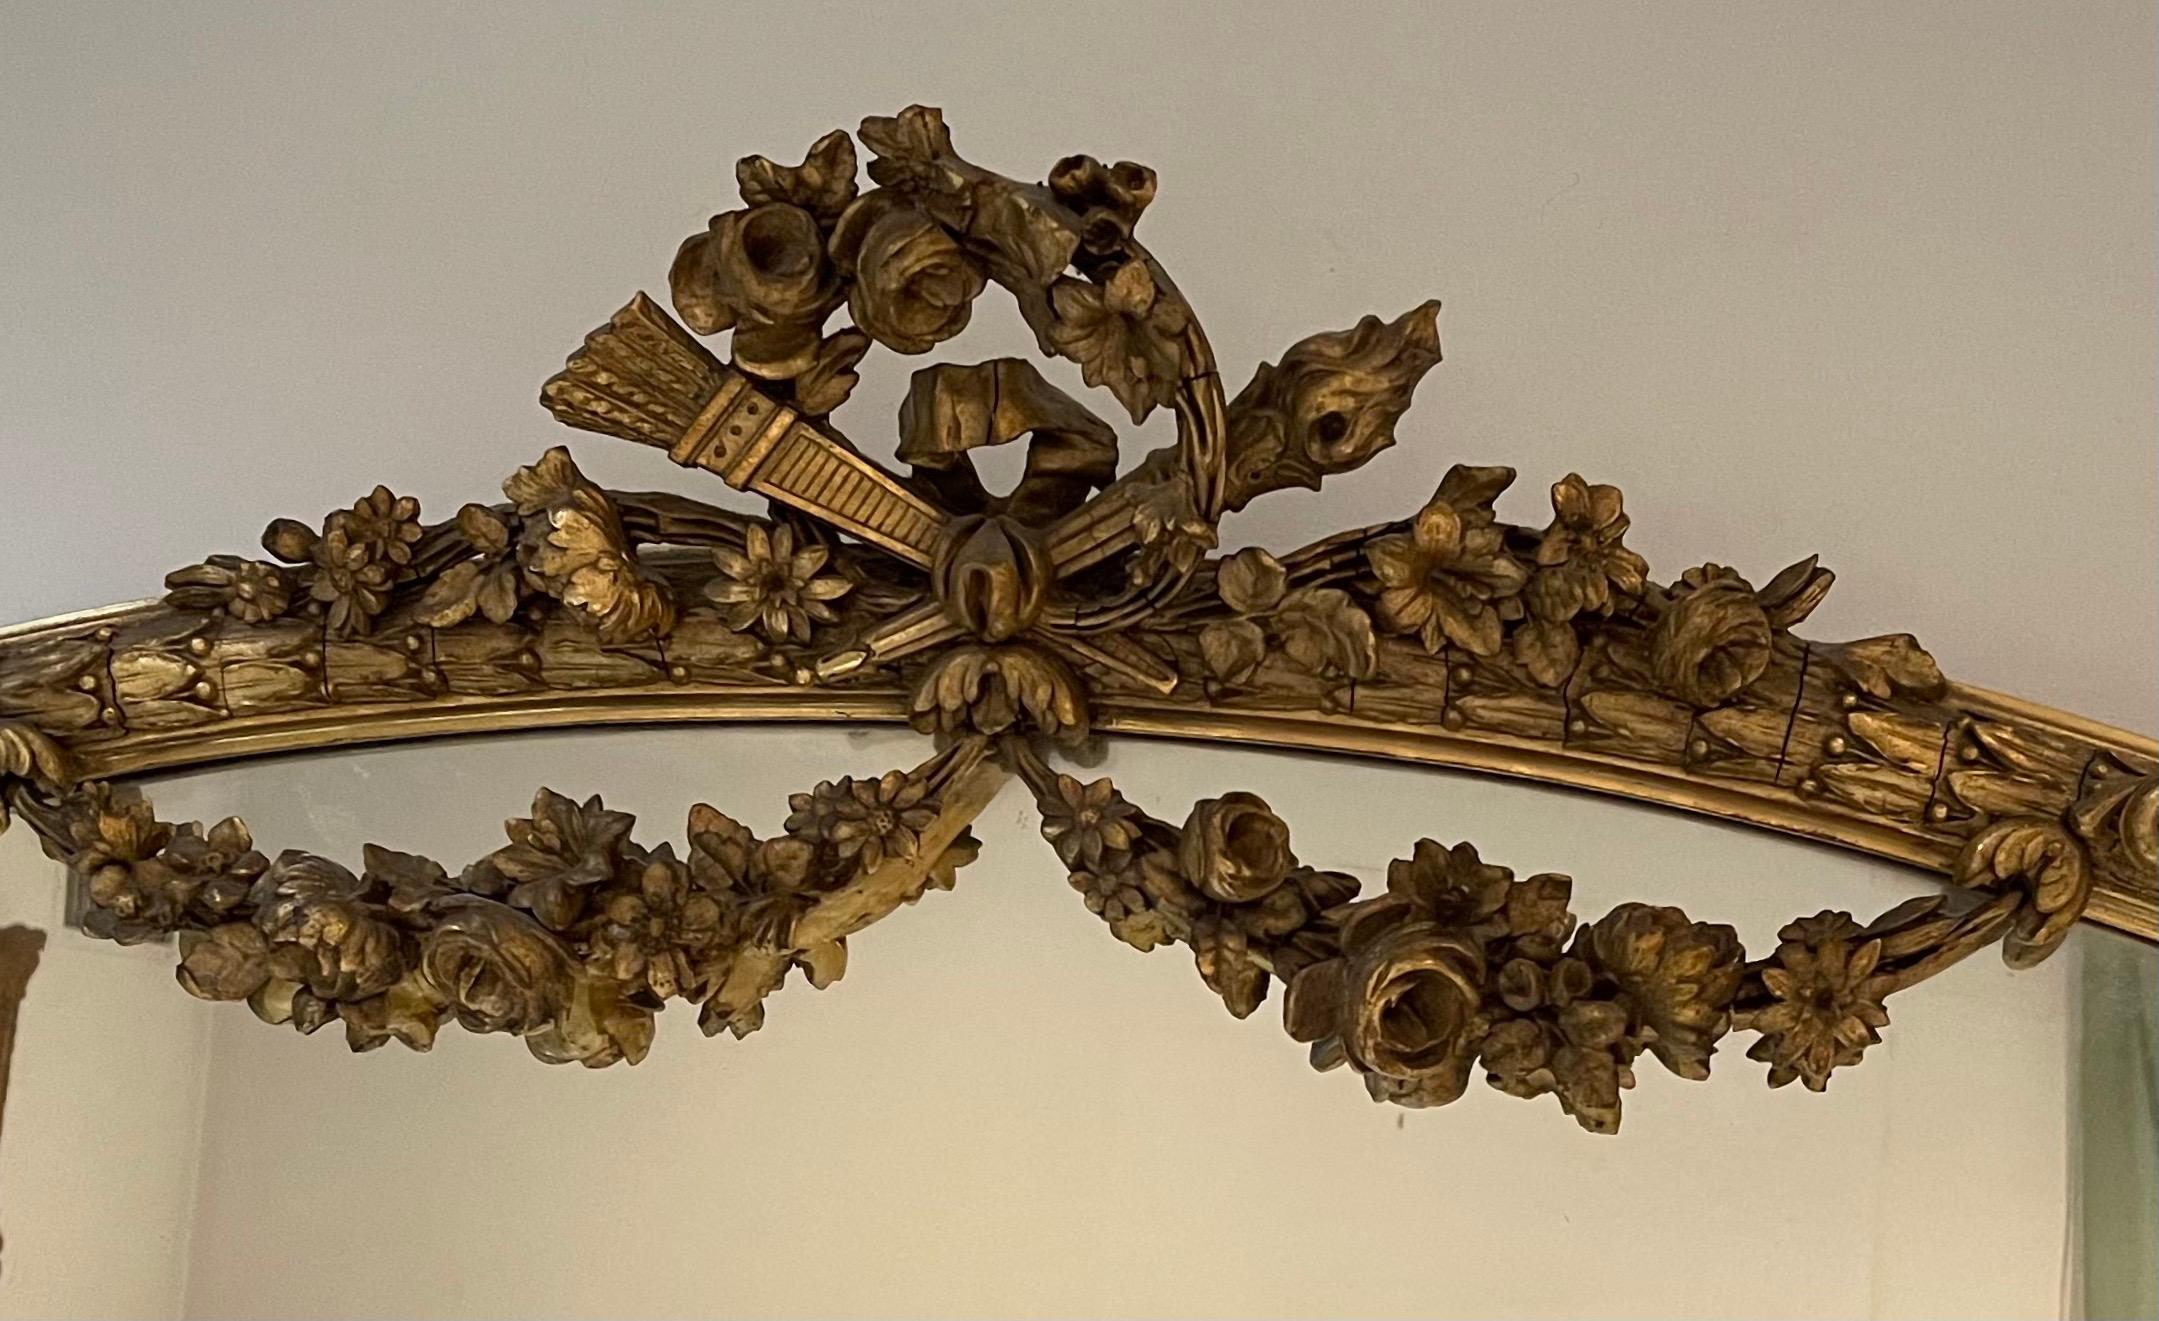 A wonderful French Louis XVI style horizontal oval giltwood with floral swags draping over the mirror, and a beautiful center crest of two cross torches. Very fine chasing and detail.
Measures: 51